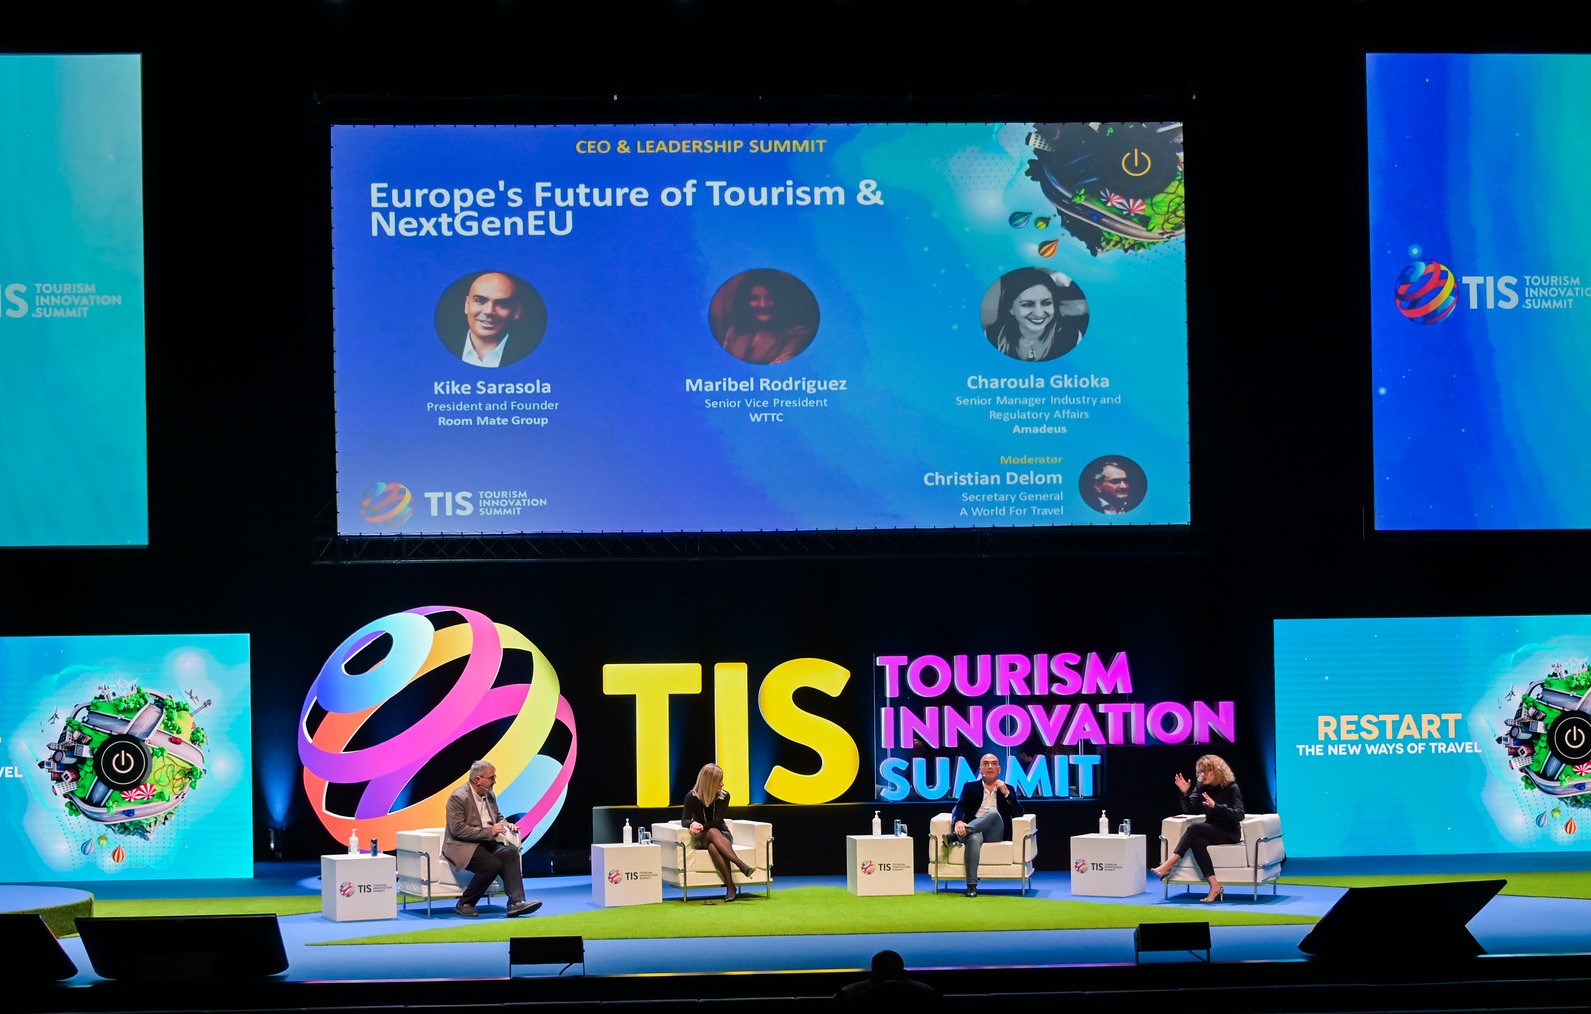 TIS2022 will analyse how the data economy and technology promote smart tourism